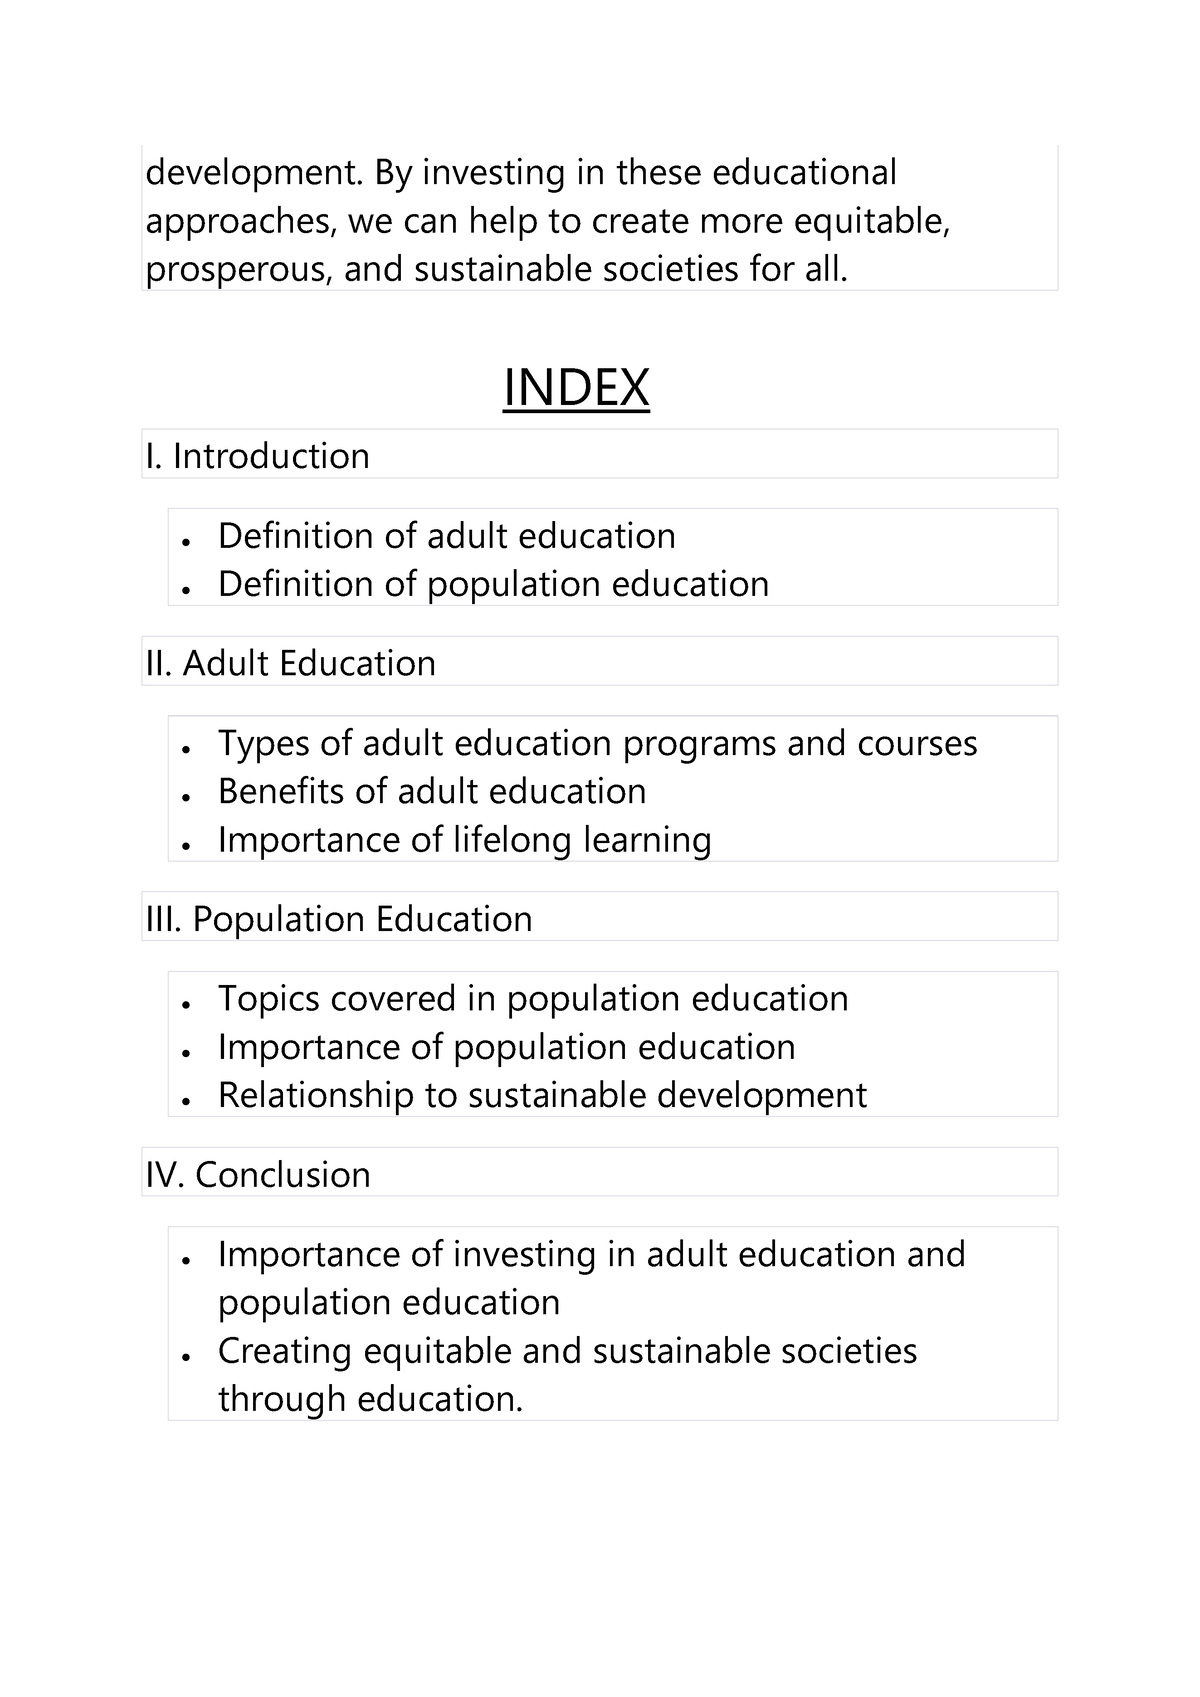 research plan on any topic of population education